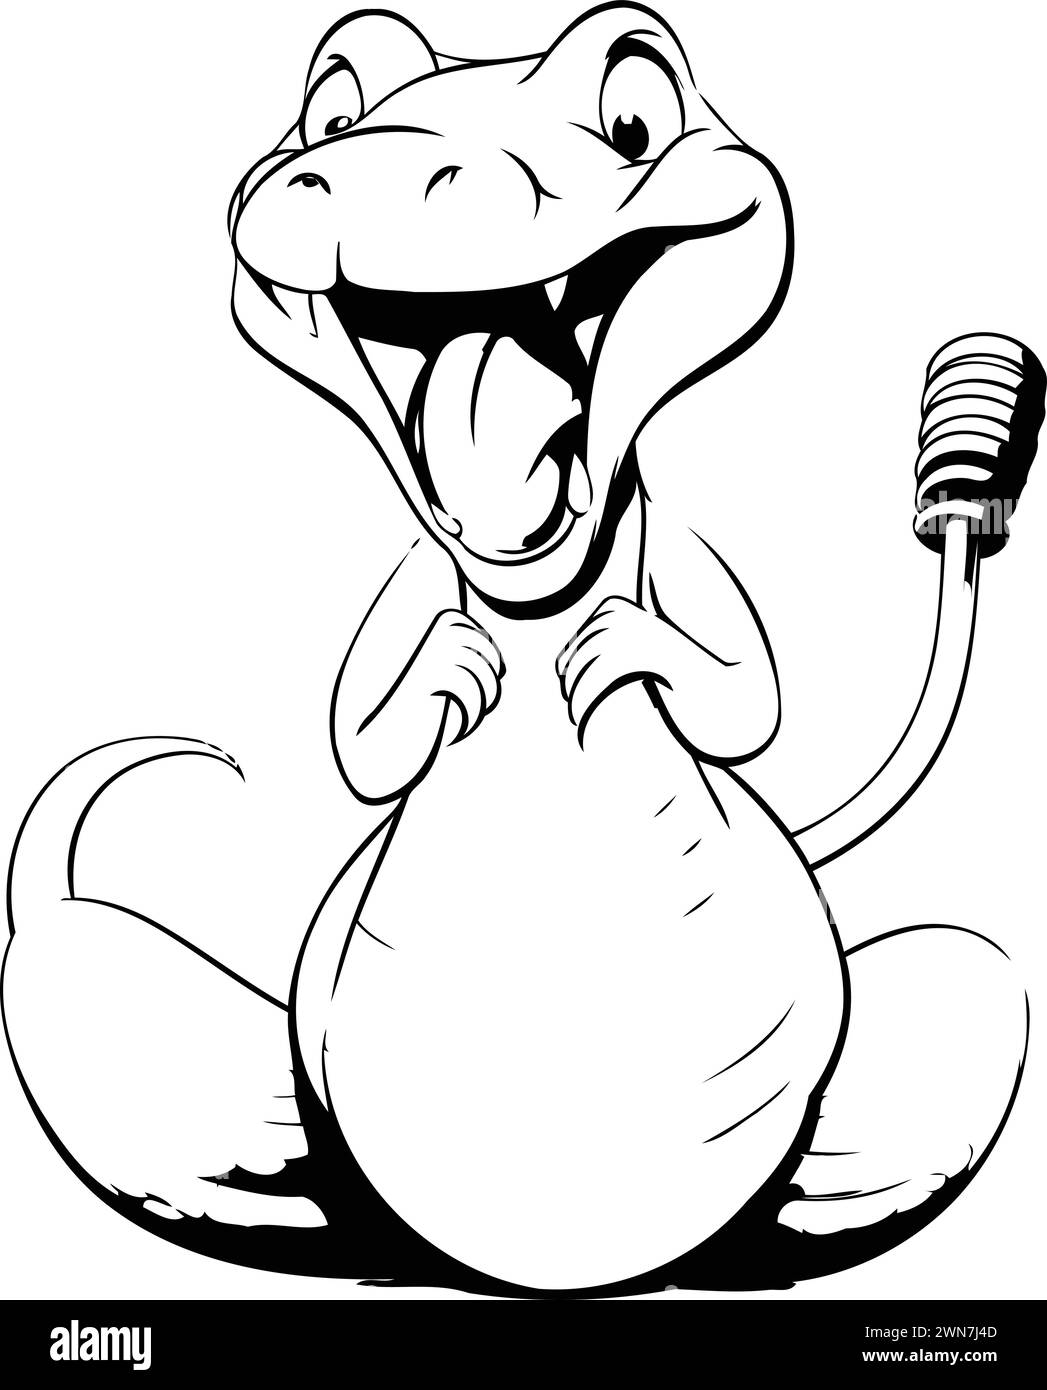 Crocodile singing a song on a microphone. Vector illustration. Stock Vector